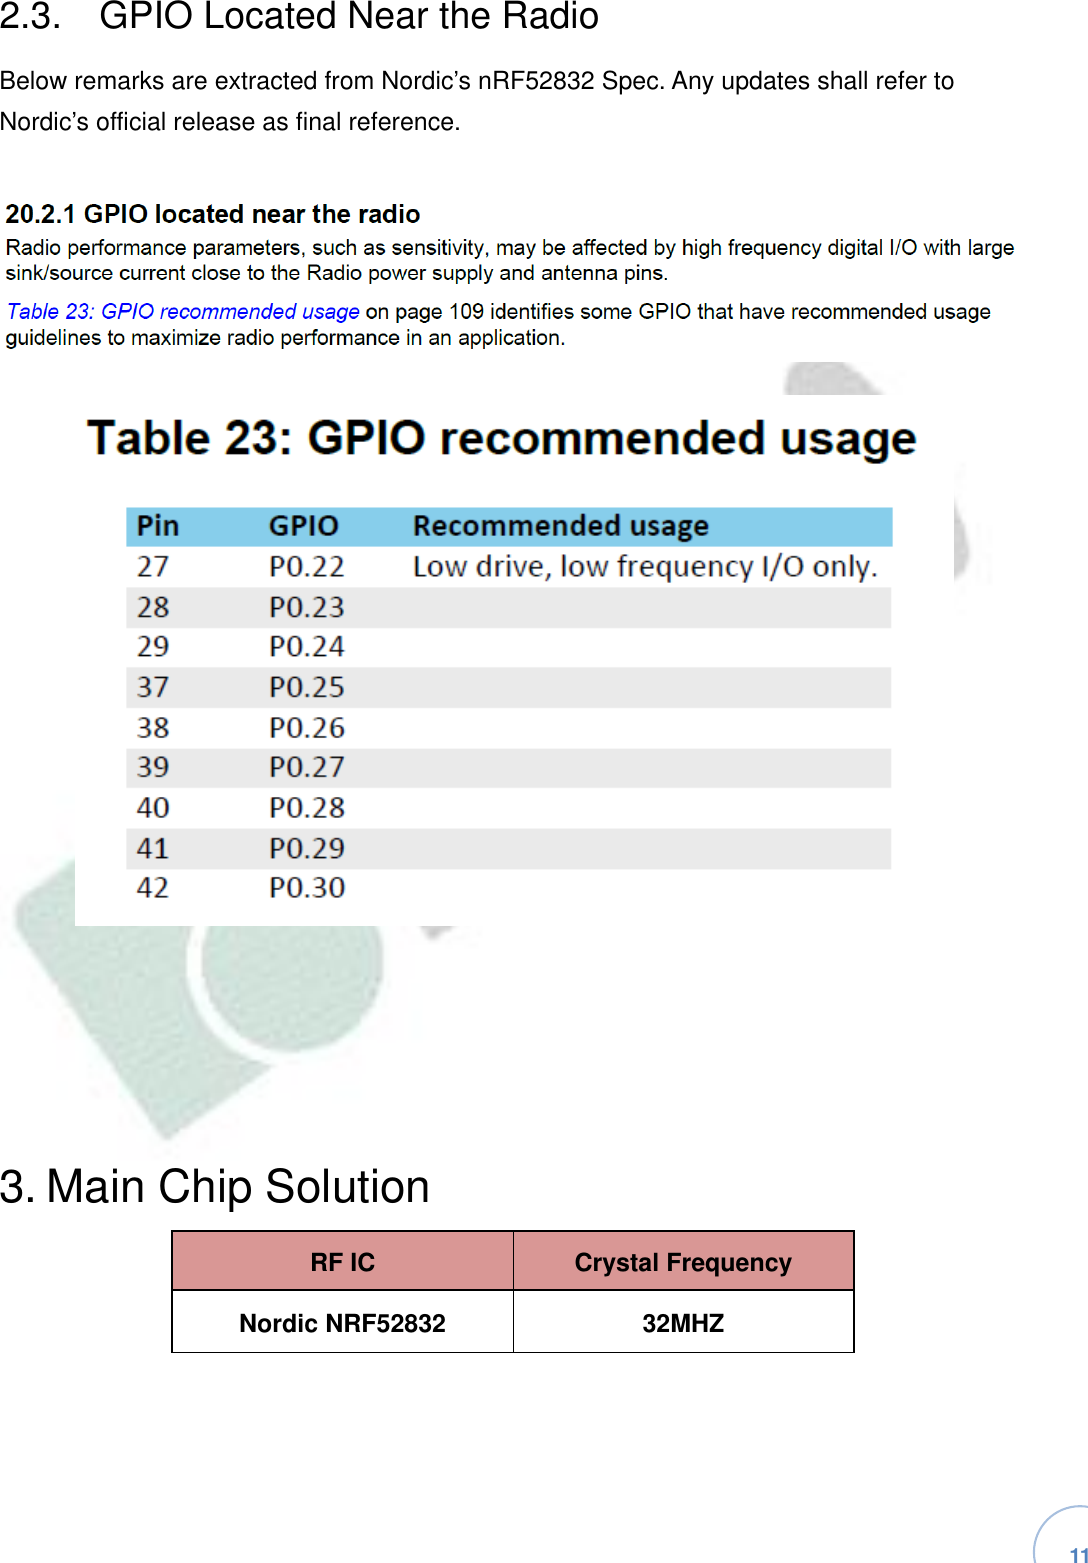   11 2.3.  GPIO Located Near the RadioBelow remarks are extracted from Nordic’s nRF52832 Spec. Any updates shall refer to Nordic’s official release as final reference.3. Main Chip SolutionRF IC Crystal Frequency Nordic NRF52832 32MHZ 